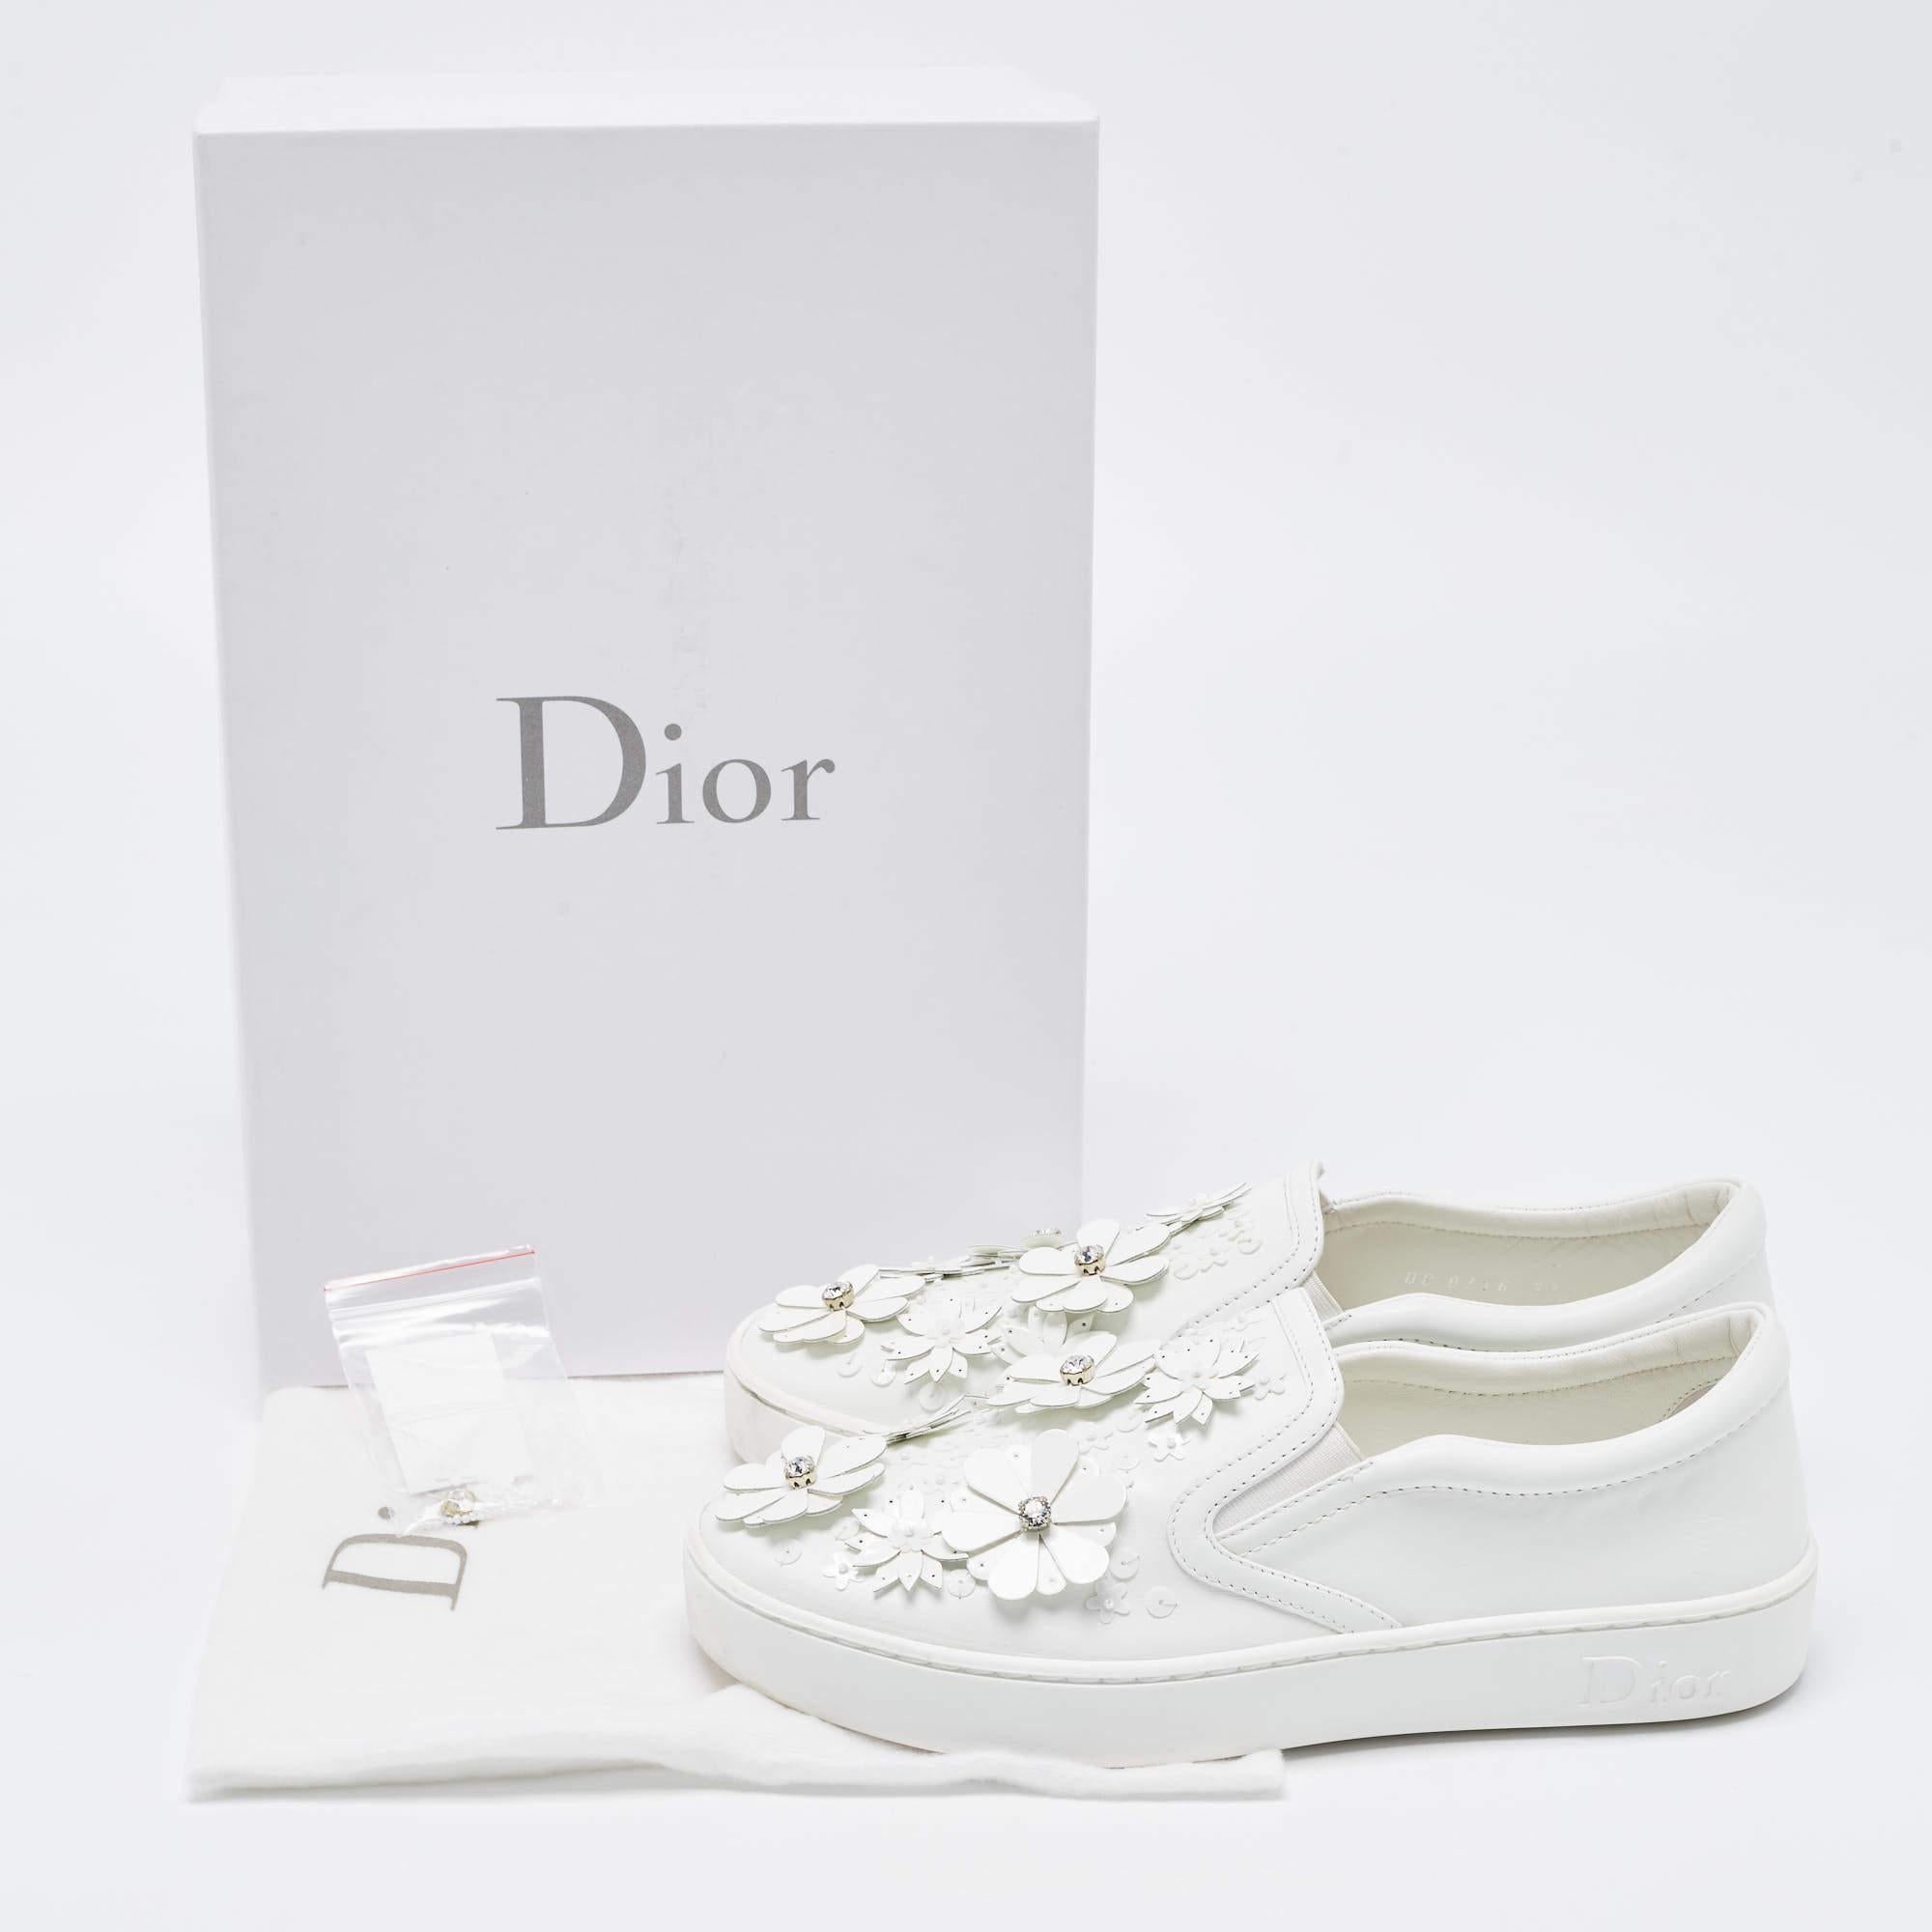 Dior White Leather Floral Crystal Embellished Slip On Sneakers Size 37 4